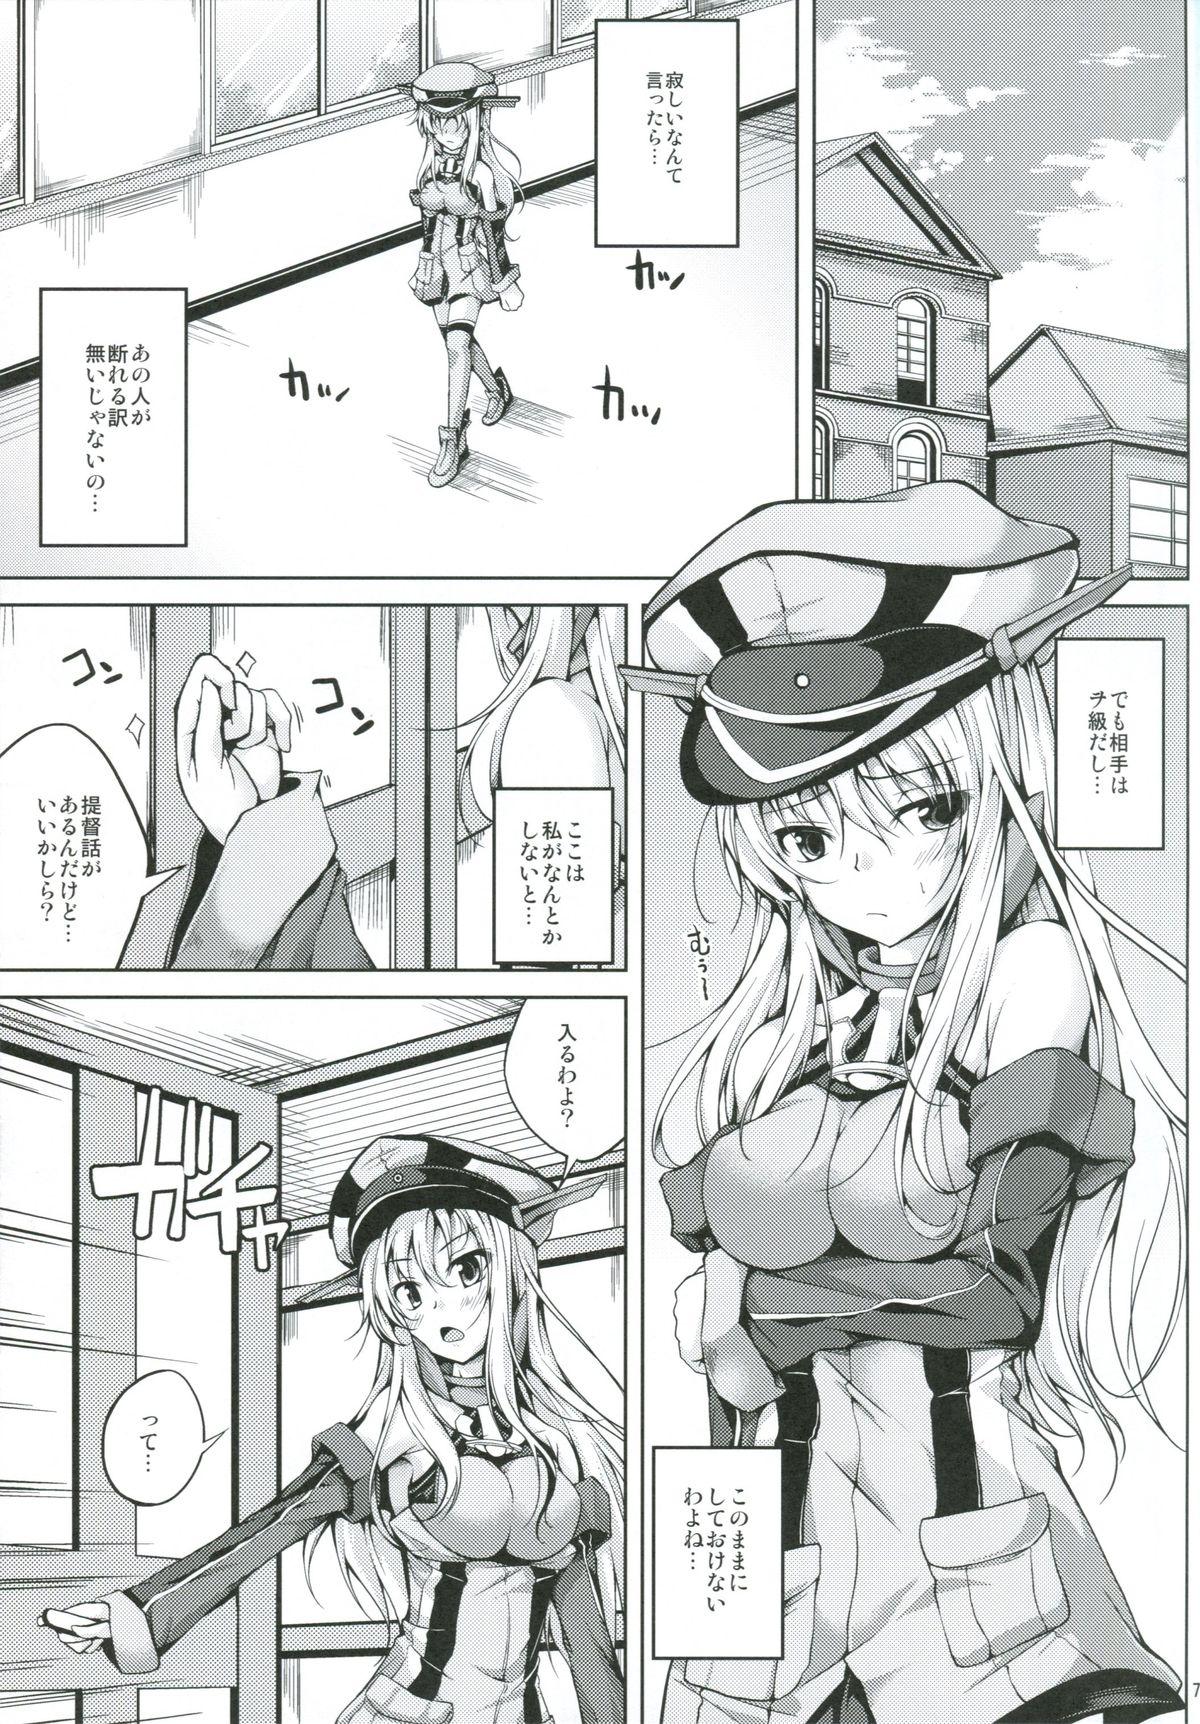 Best Blow Job Koiiro Moyou 7 - Kantai collection Gagging - Page 6